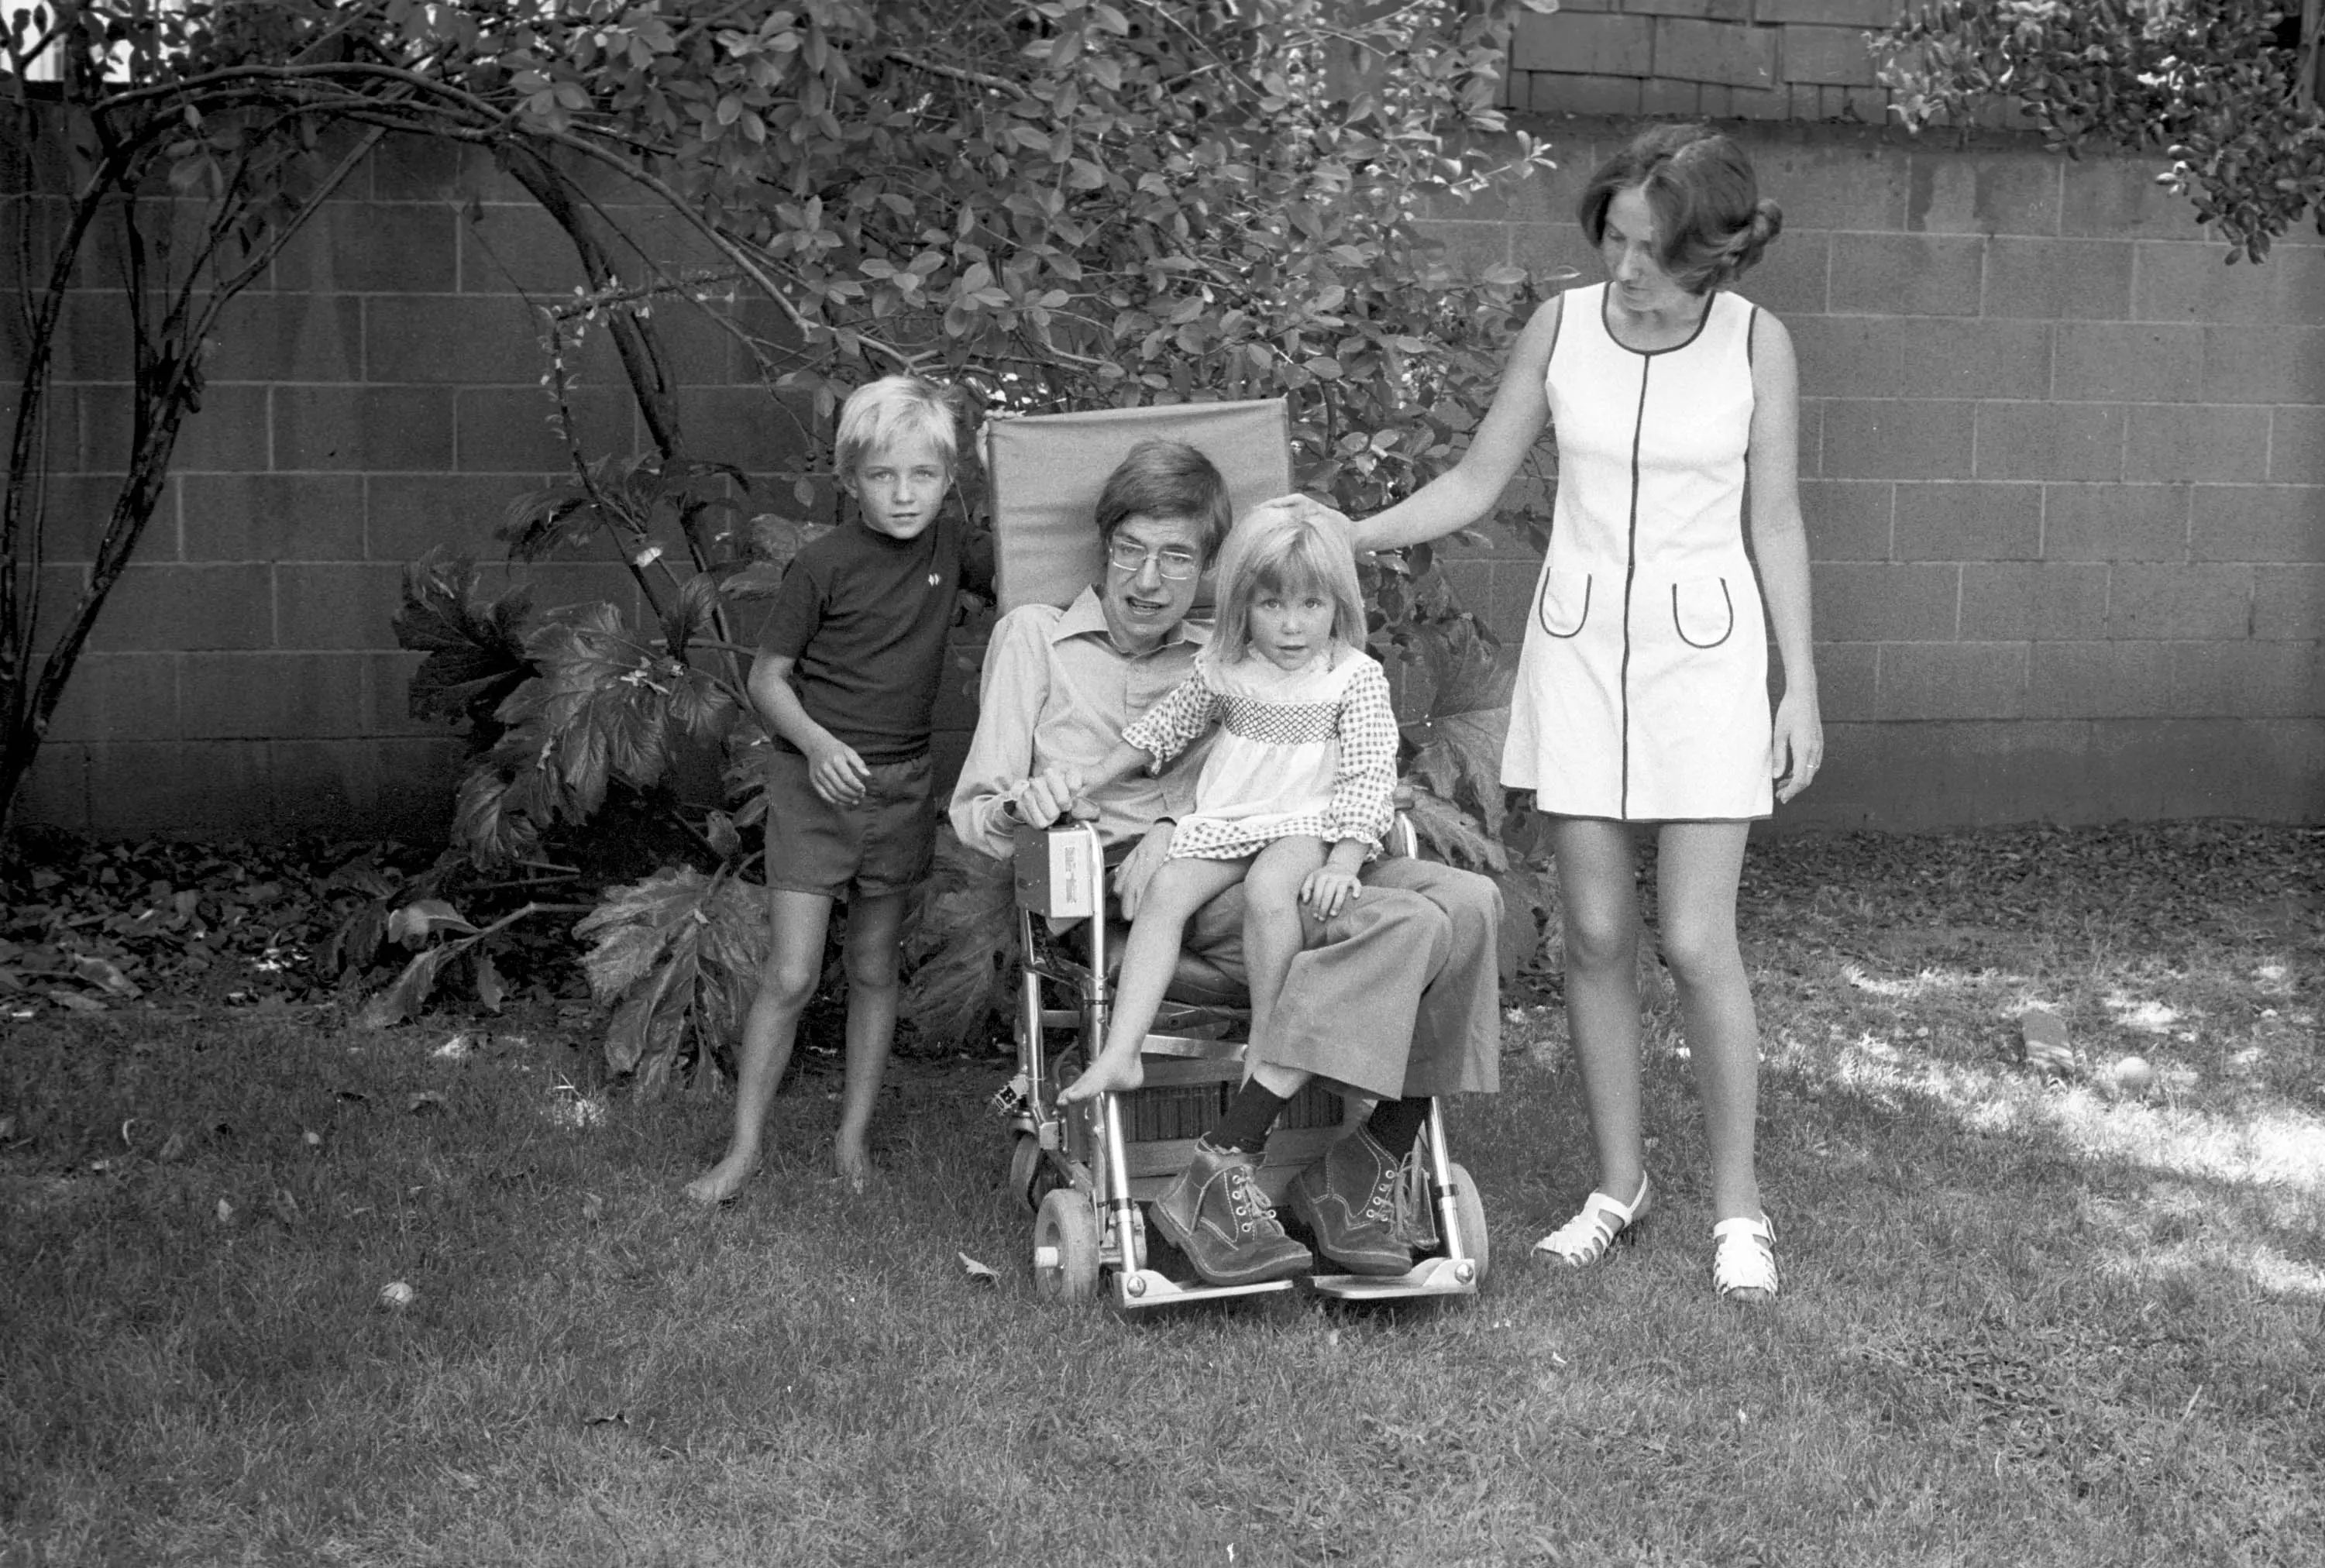 Hawking with his family.